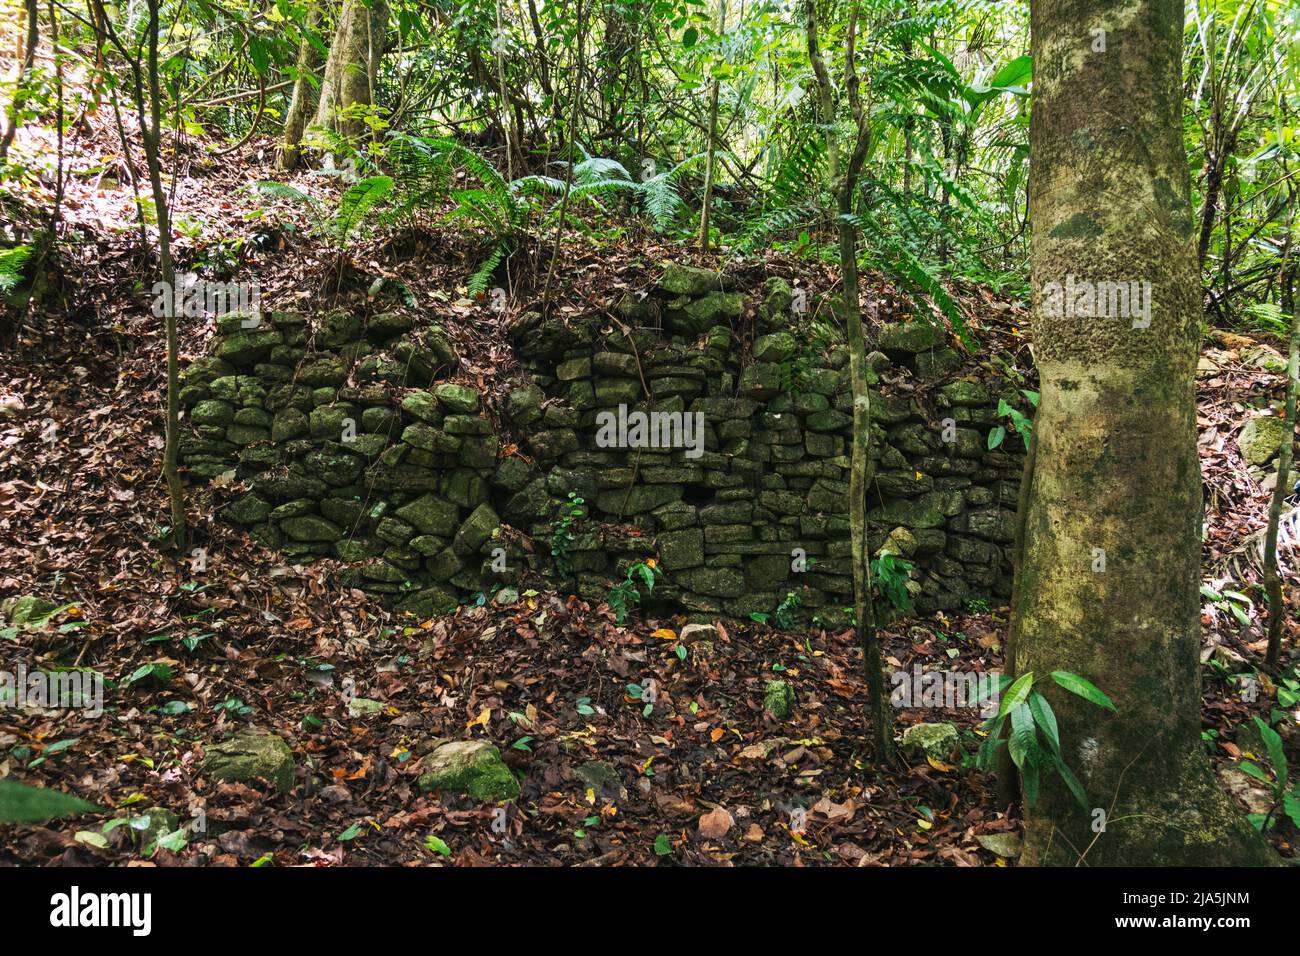 ancient Mayan stone walls exposed through dense undergrowth in the Palenque Archaeological Zone, Chiapas, Mexico. Much of the ruins are still buried Stock Photo